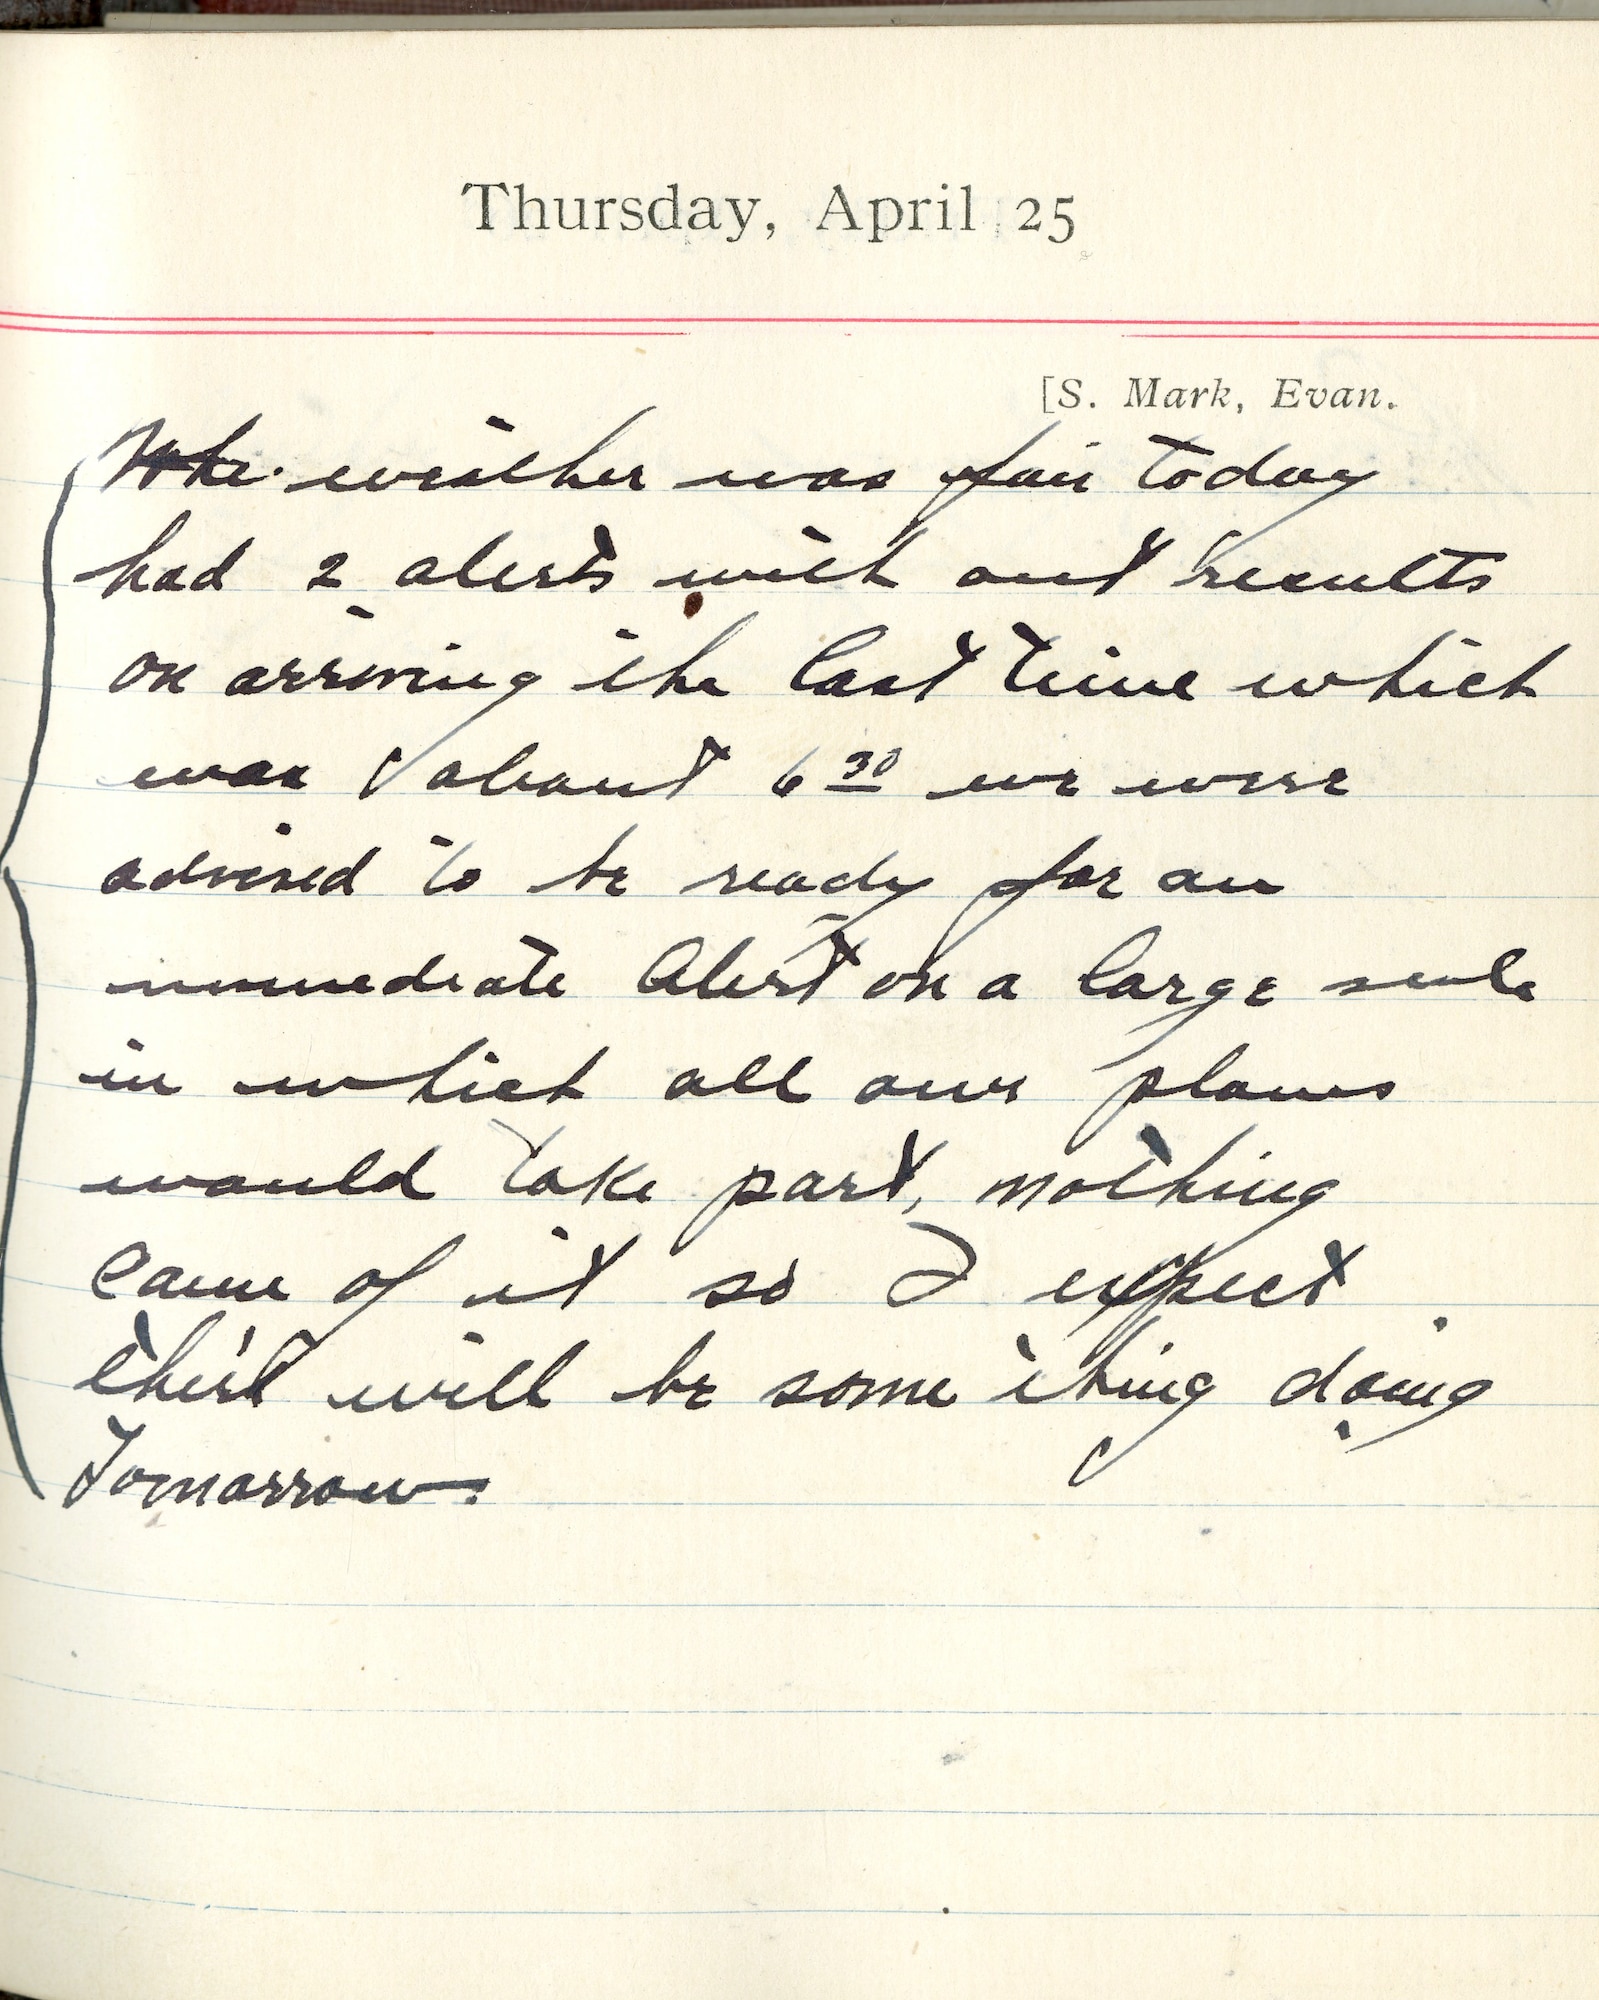 Capt. Edward V. Rickenbacker's 1918 wartime diary entry. (04/25/1918). The weather was fair today.  Had 2 alerts without results.  On arriving the last time which was about 6:30, we were advised to be ready for an immediate alert on a large scale in which all our planes would take part.  Nothing came of it, so I expect there will be something doing tomorrow.